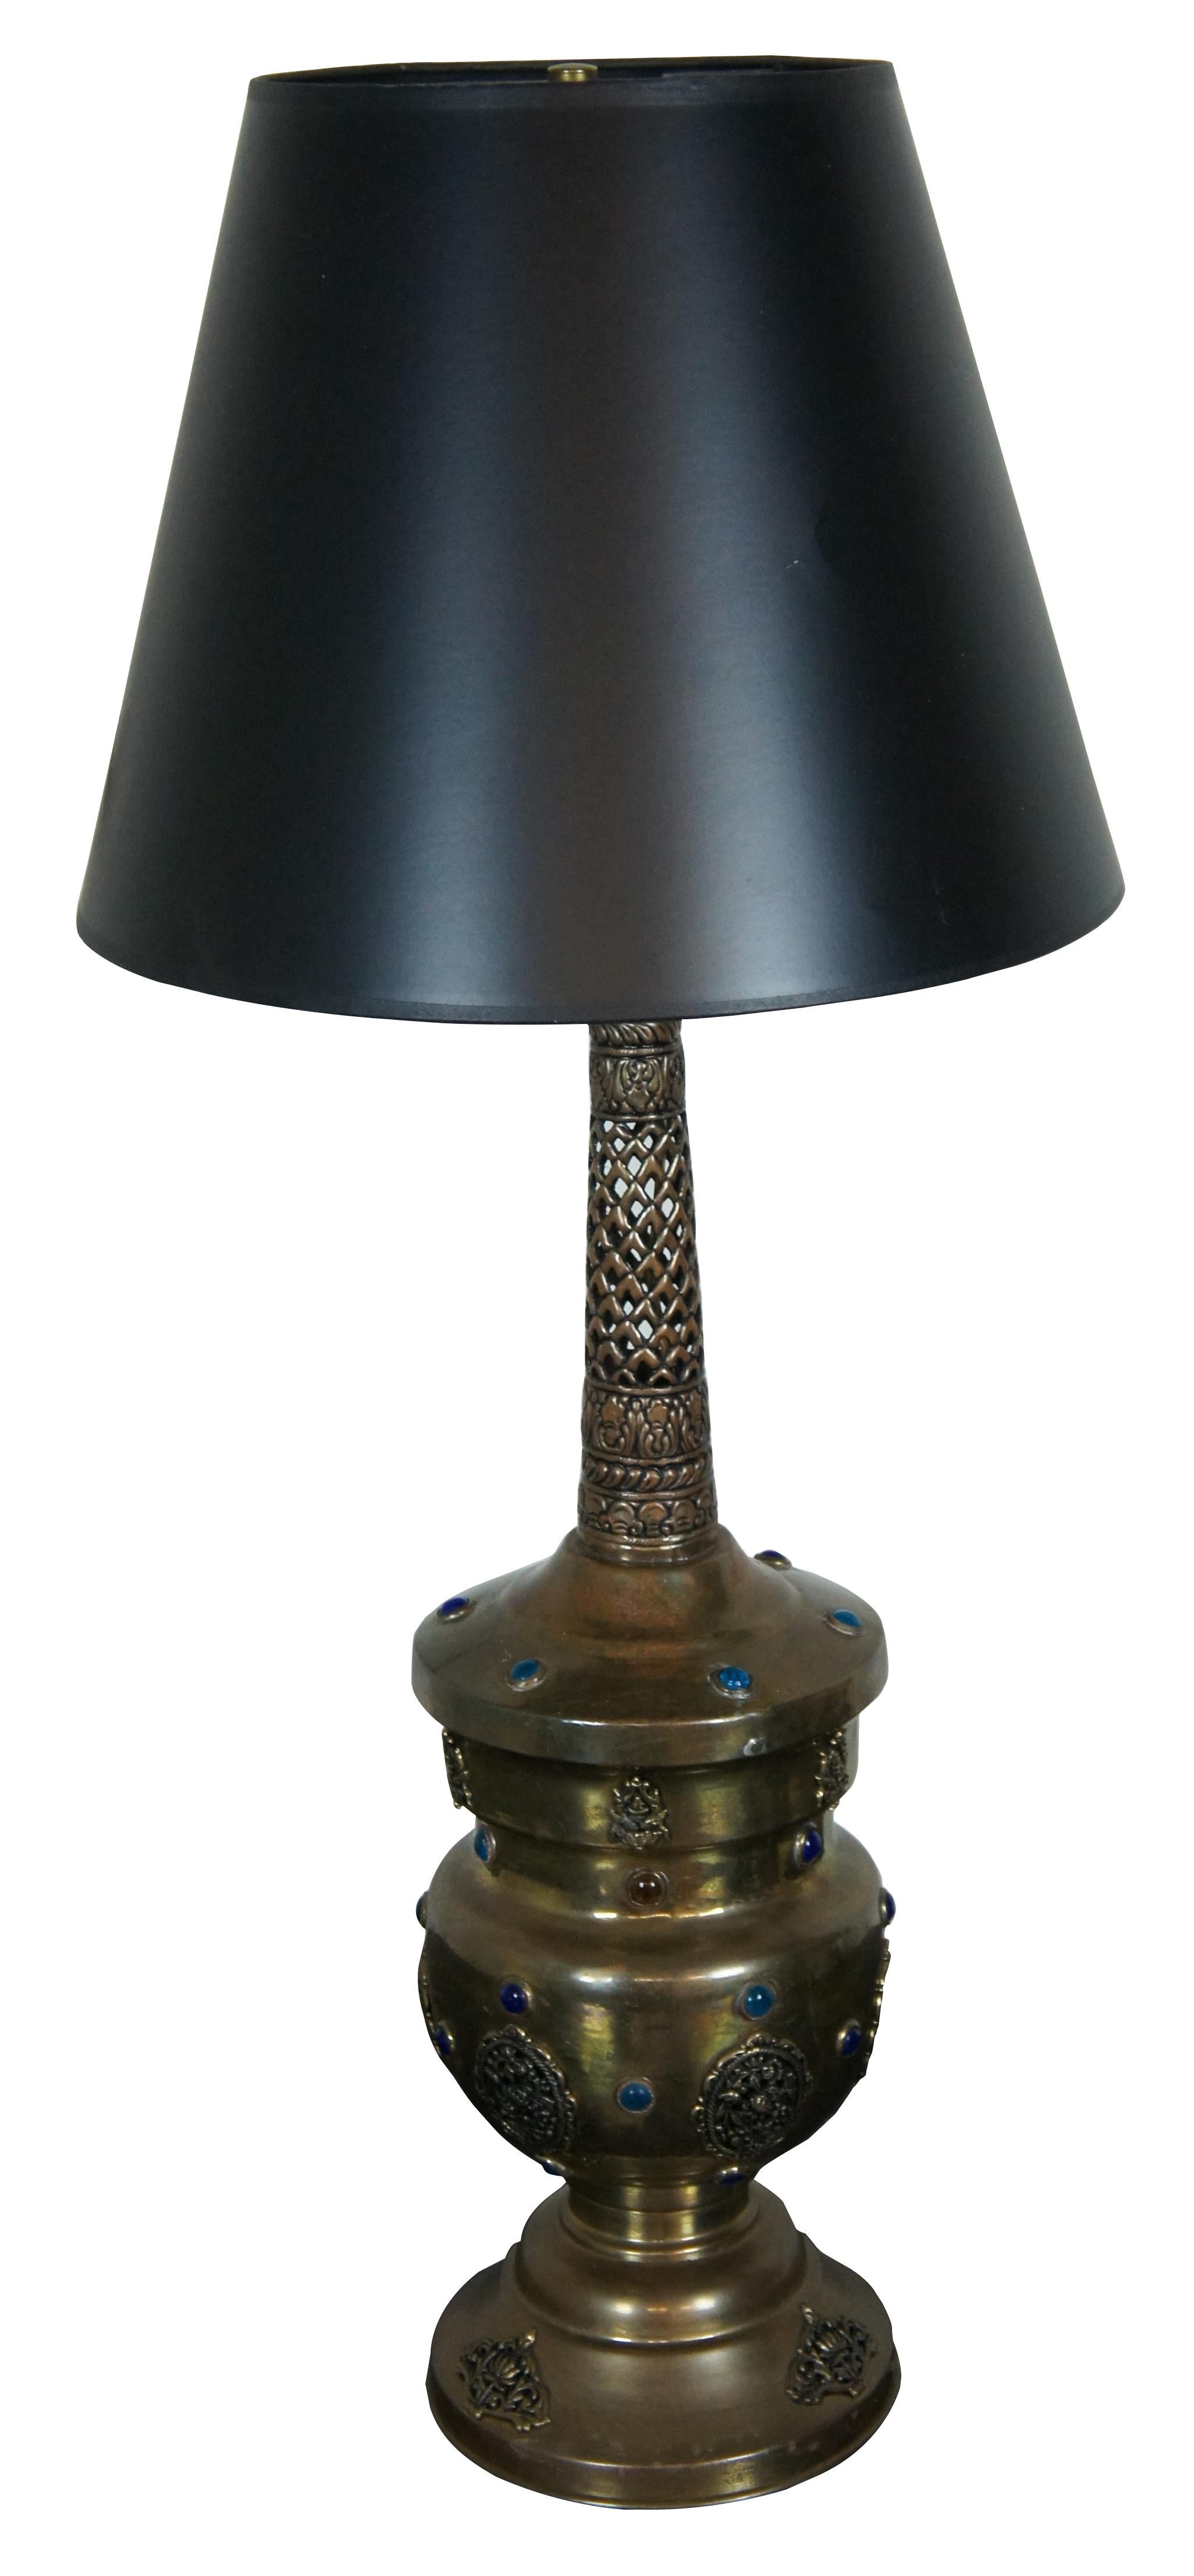 Vintage Moroccan / Moorish pierced brass table lamp decorated with floral motifs and multi-colored gemstones.

Measures: 7” x 26” / Shade - 14” x 11” / Total Height – 33” (Diameter x Height).